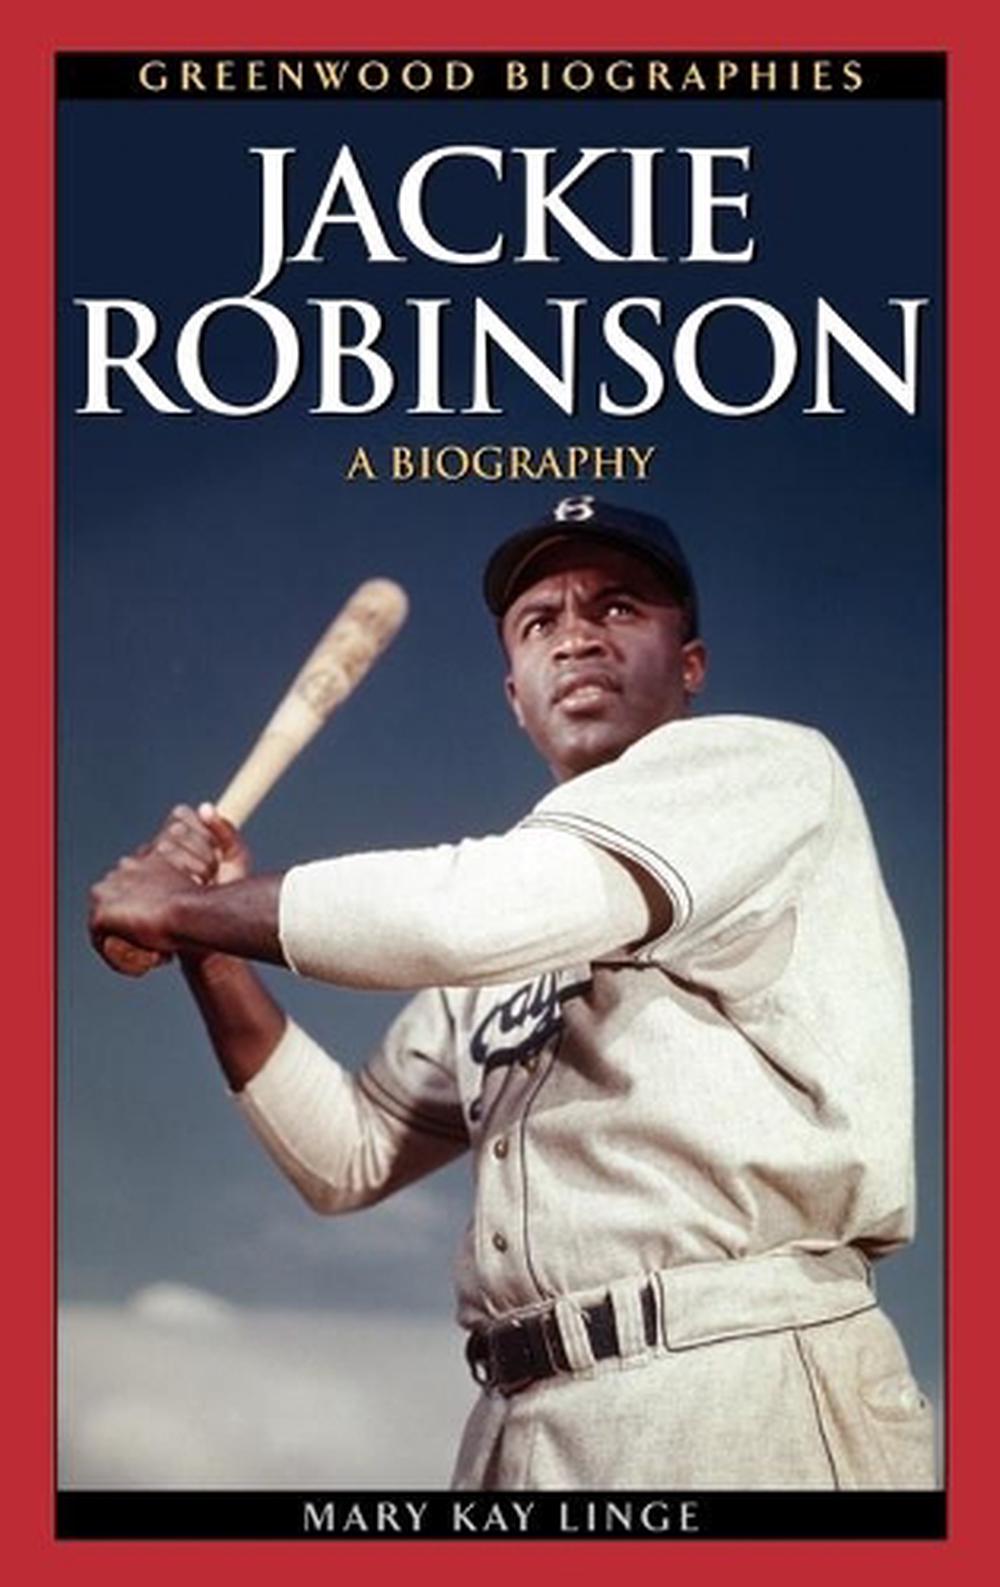 biography book about jackie robinson